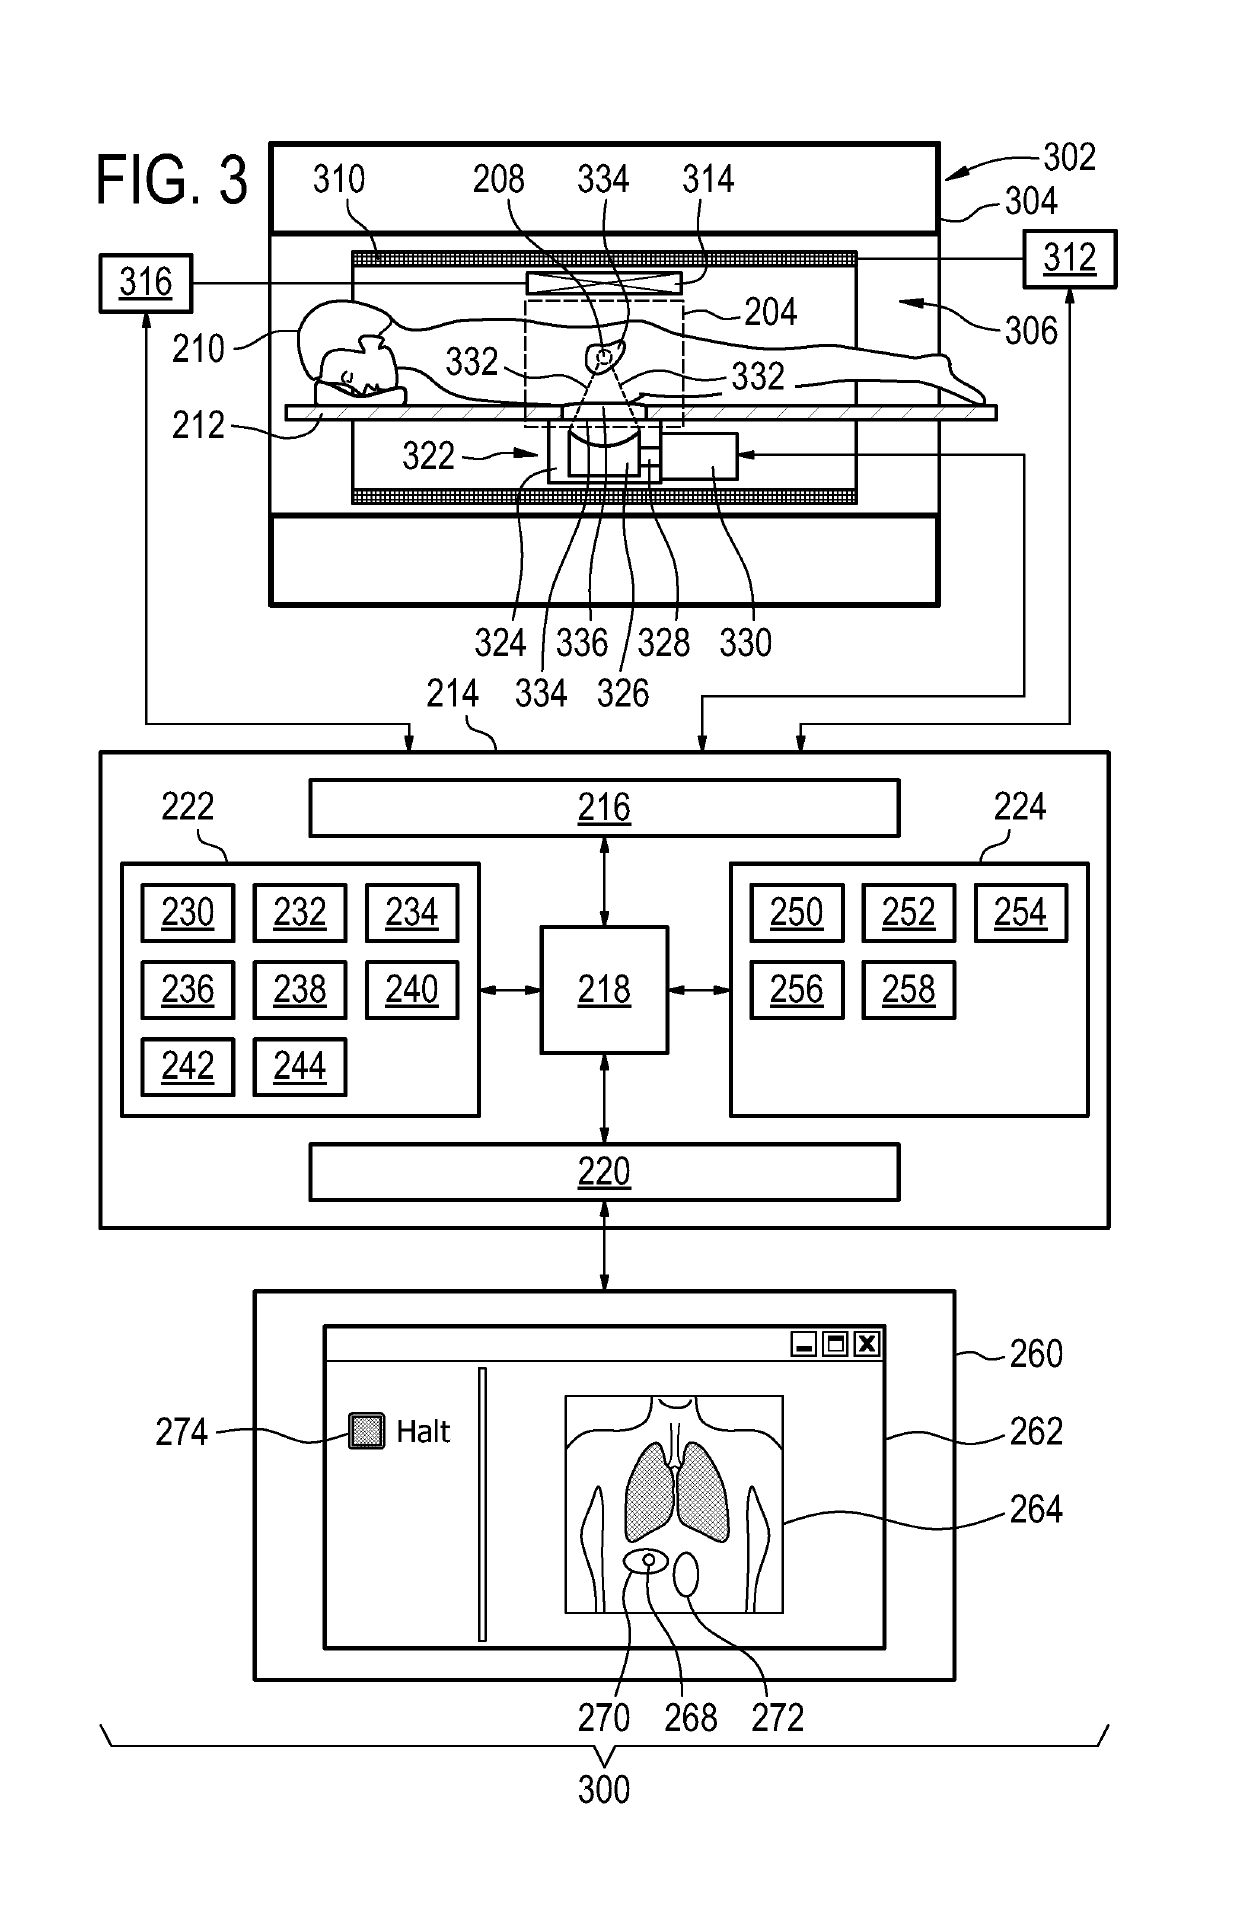 Graphical user interface for medical instruments